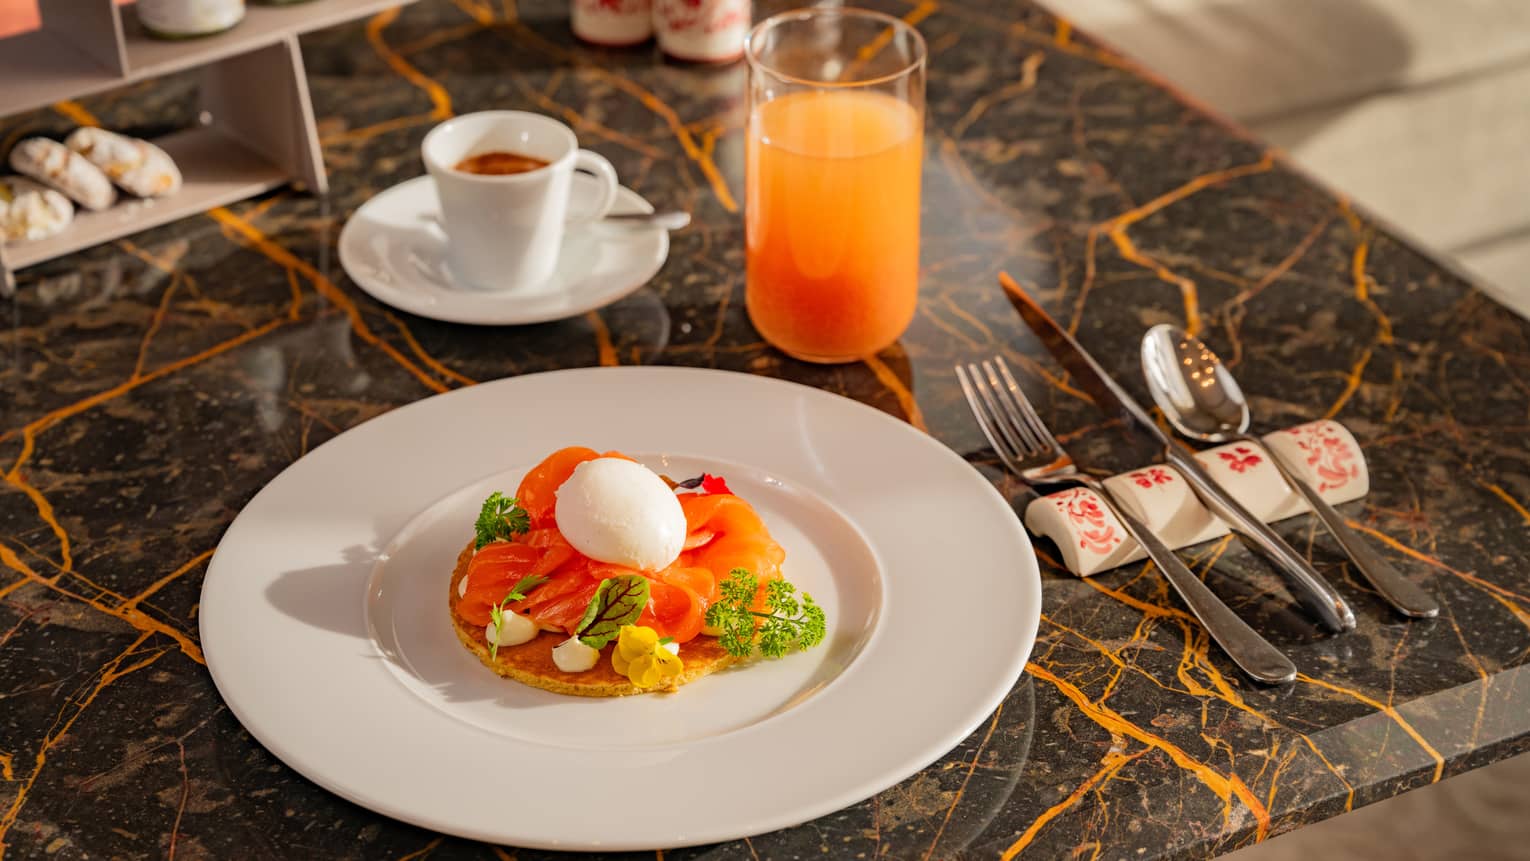 Pancake topped with sliced salmon and hard-boiled egg beside flatware, cup of espresso and glass of juice